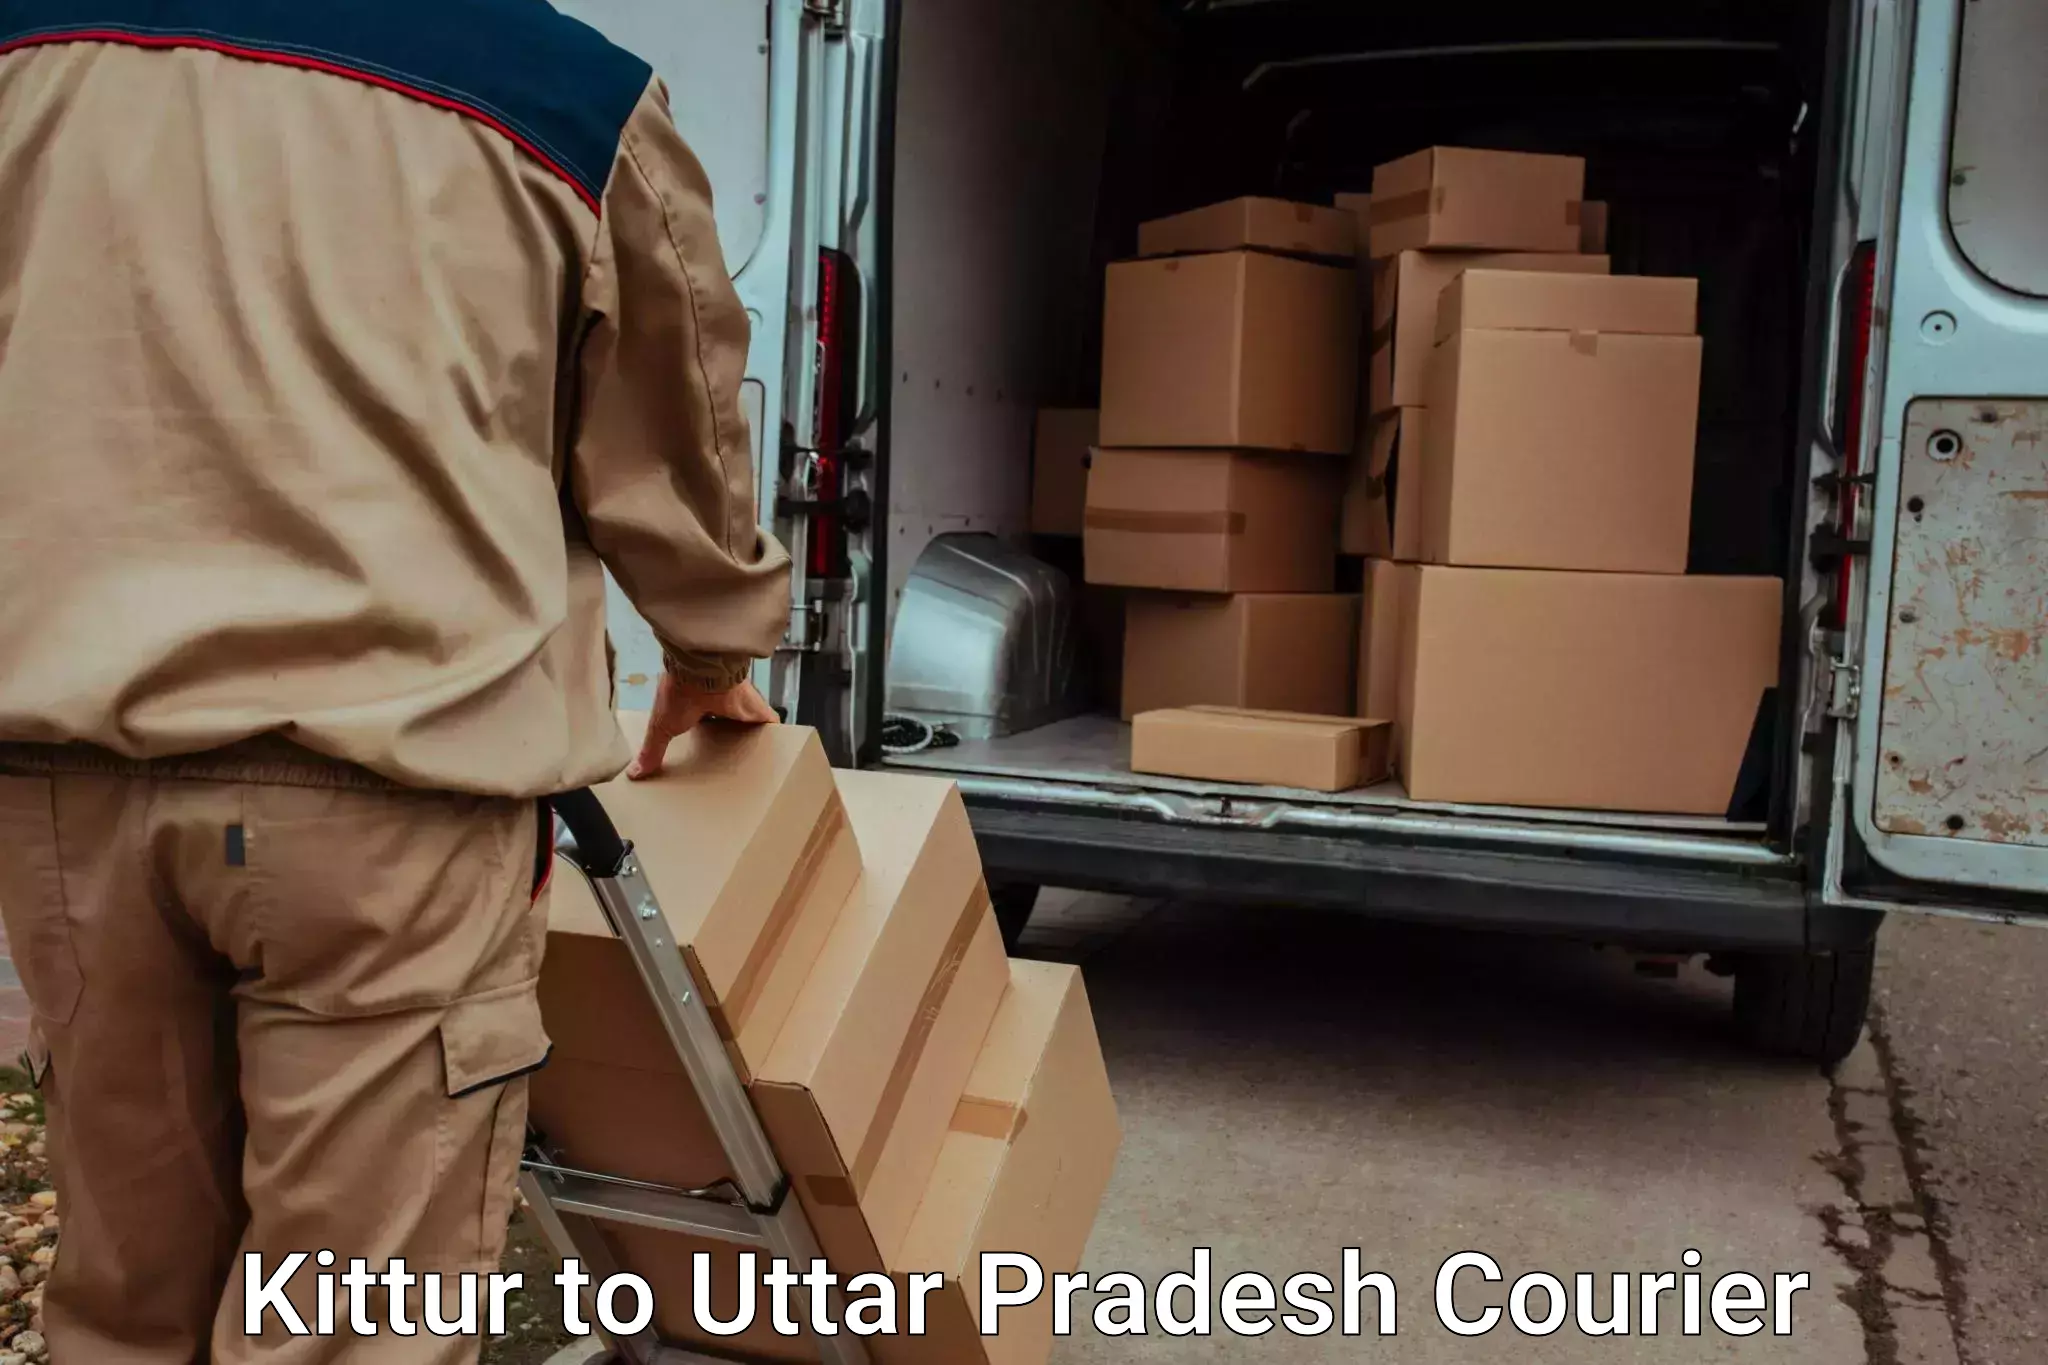 Online luggage shipping Kittur to Aligarh